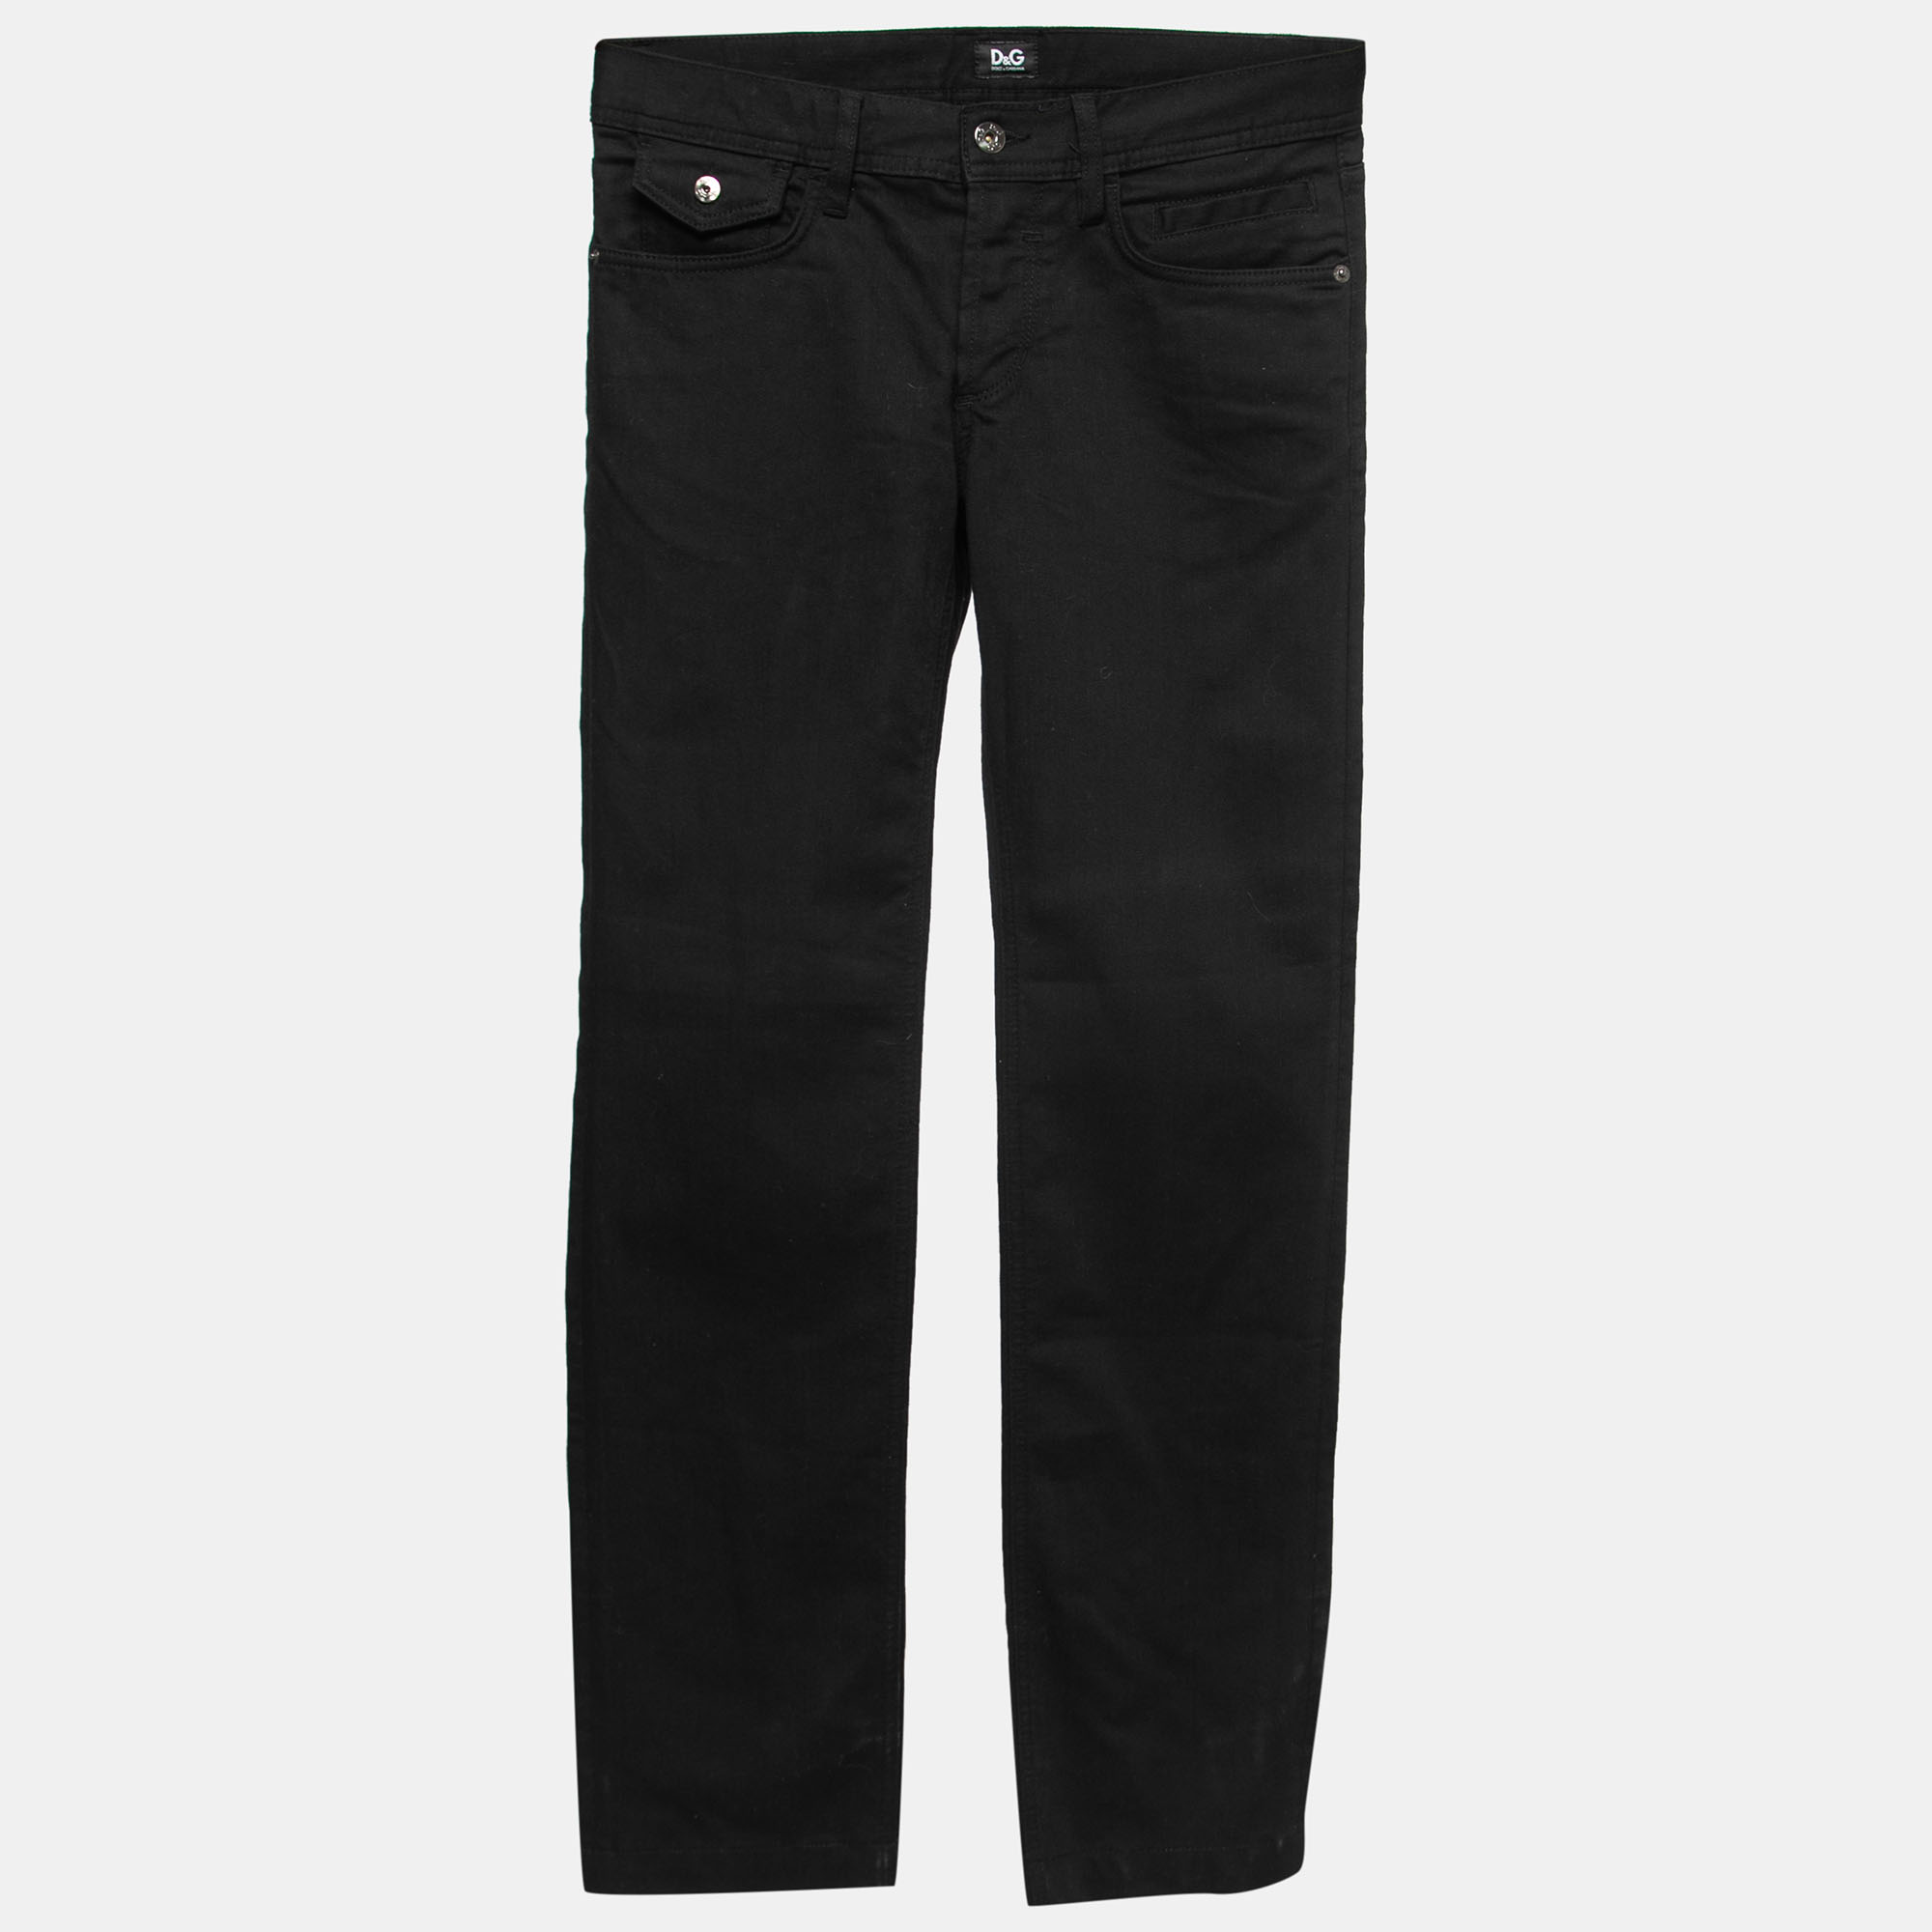 Pre-owned D & G Black Denim Straight Fit Power Jeans S